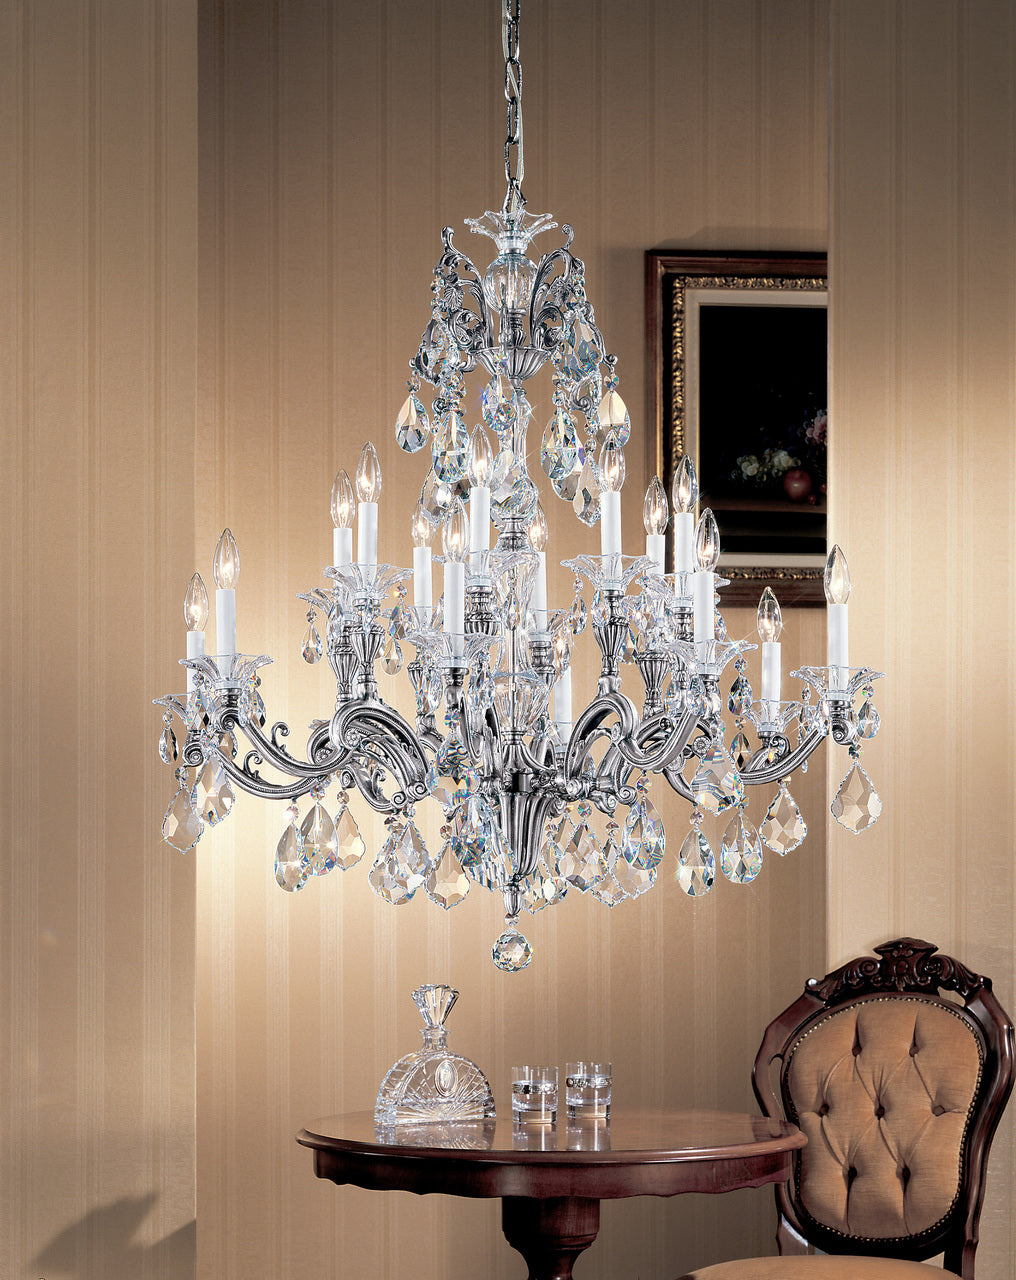 Classic Lighting 57116 RB CBK Via Firenze Crystal Chandelier in Roman Bronze (Imported from Spain)